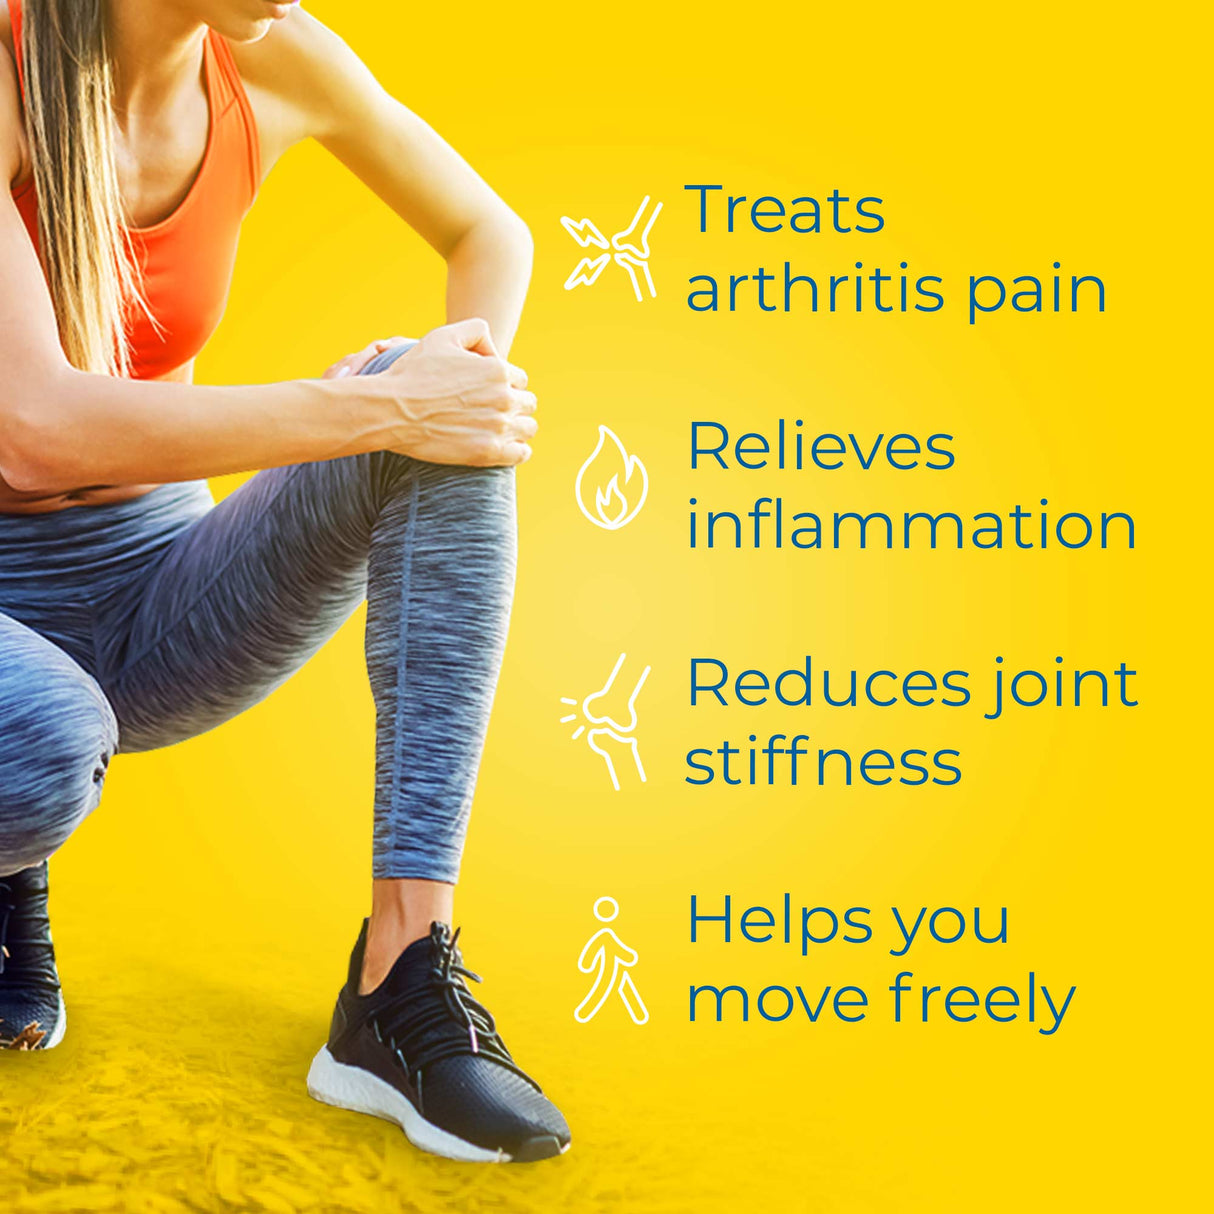 arthritis pain reliever treats arthritis pain relieves inflammation reduces joint stiffness and helps you move freely